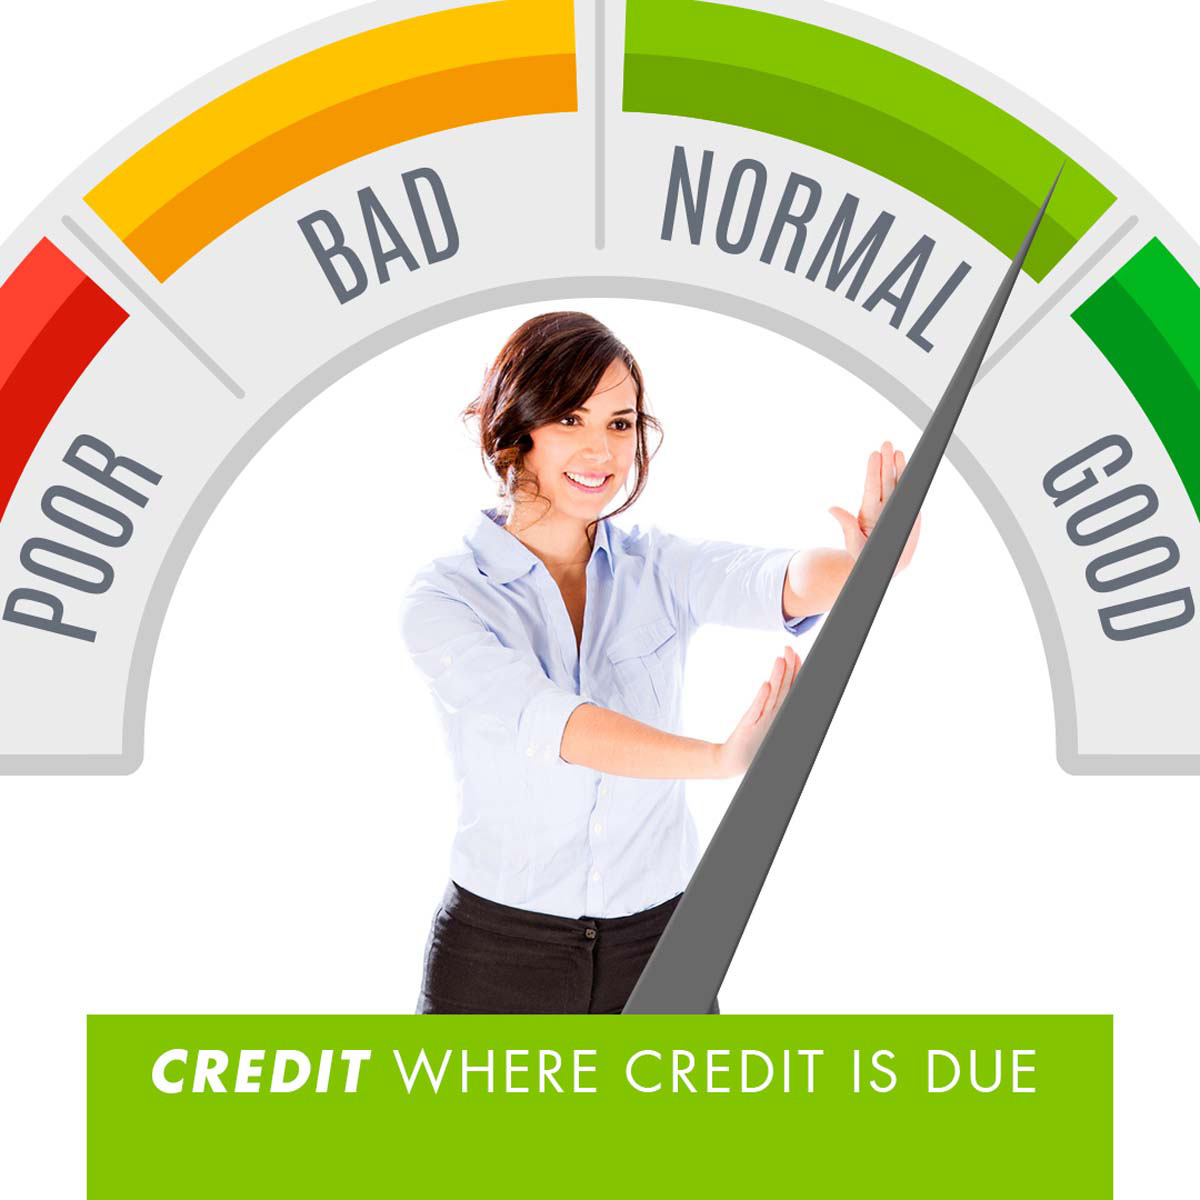 Knowing and analyzing your credit history is vital for getting the best rates. It helps you see where you stand and where you can improve. Take time to assess your creditworthiness and find ways to achieve favorable rates. #CreditHistory #FinancialWellbeing